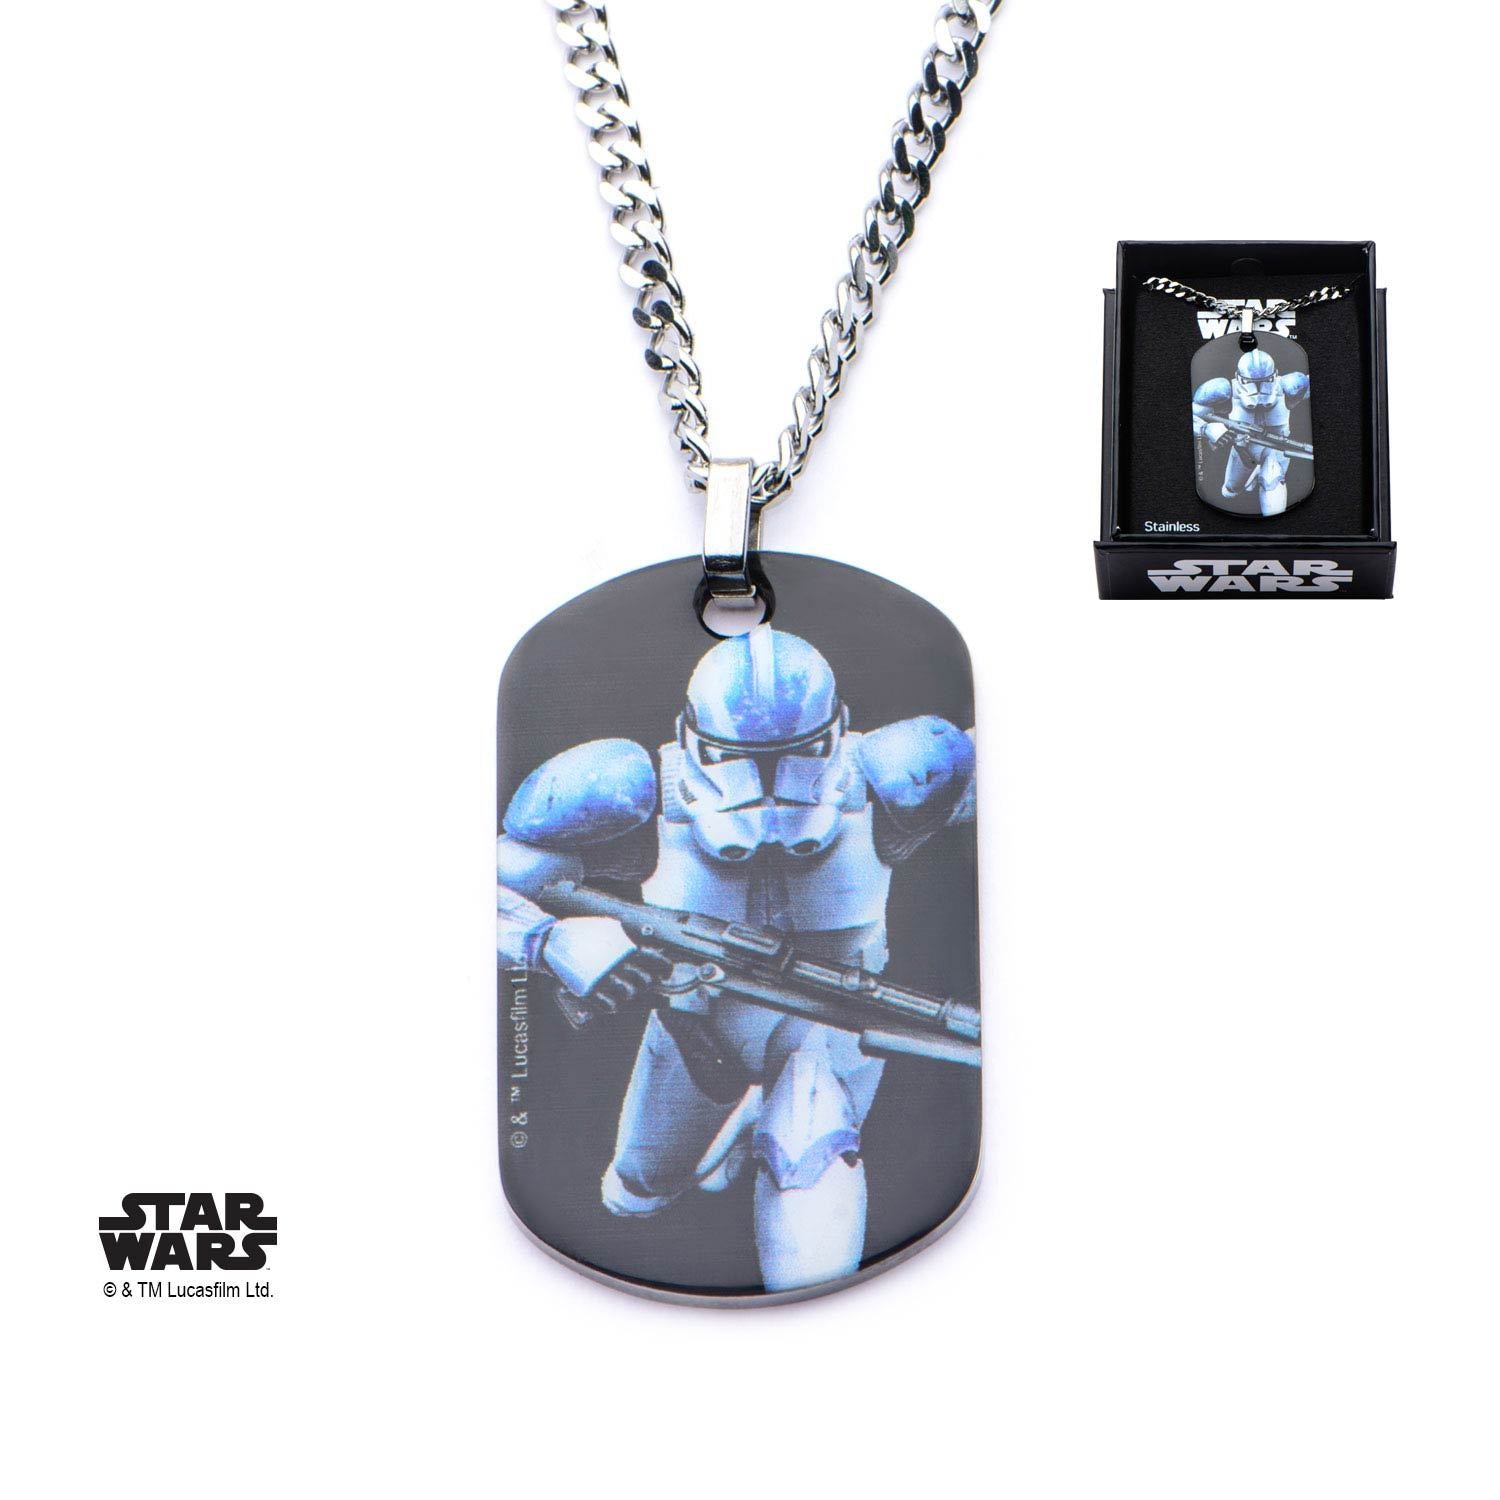 Star Wars Graphic Stormtrooper Dog Tag Pendant Necklace